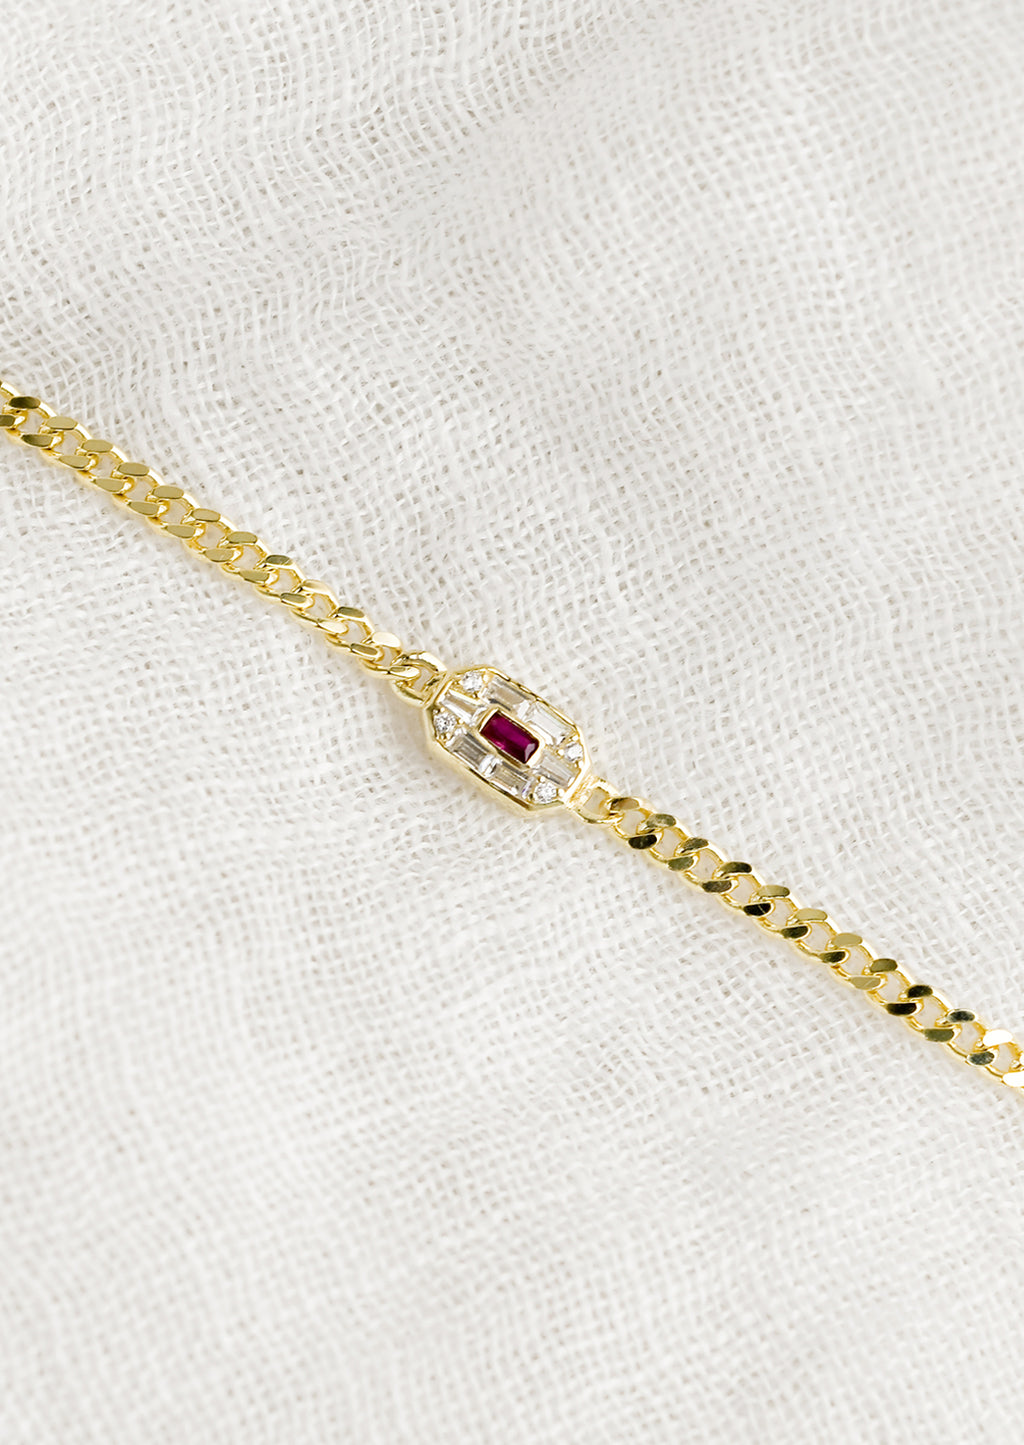 2: A gold chainlink bracelet with baguette ruby and crystal charm.